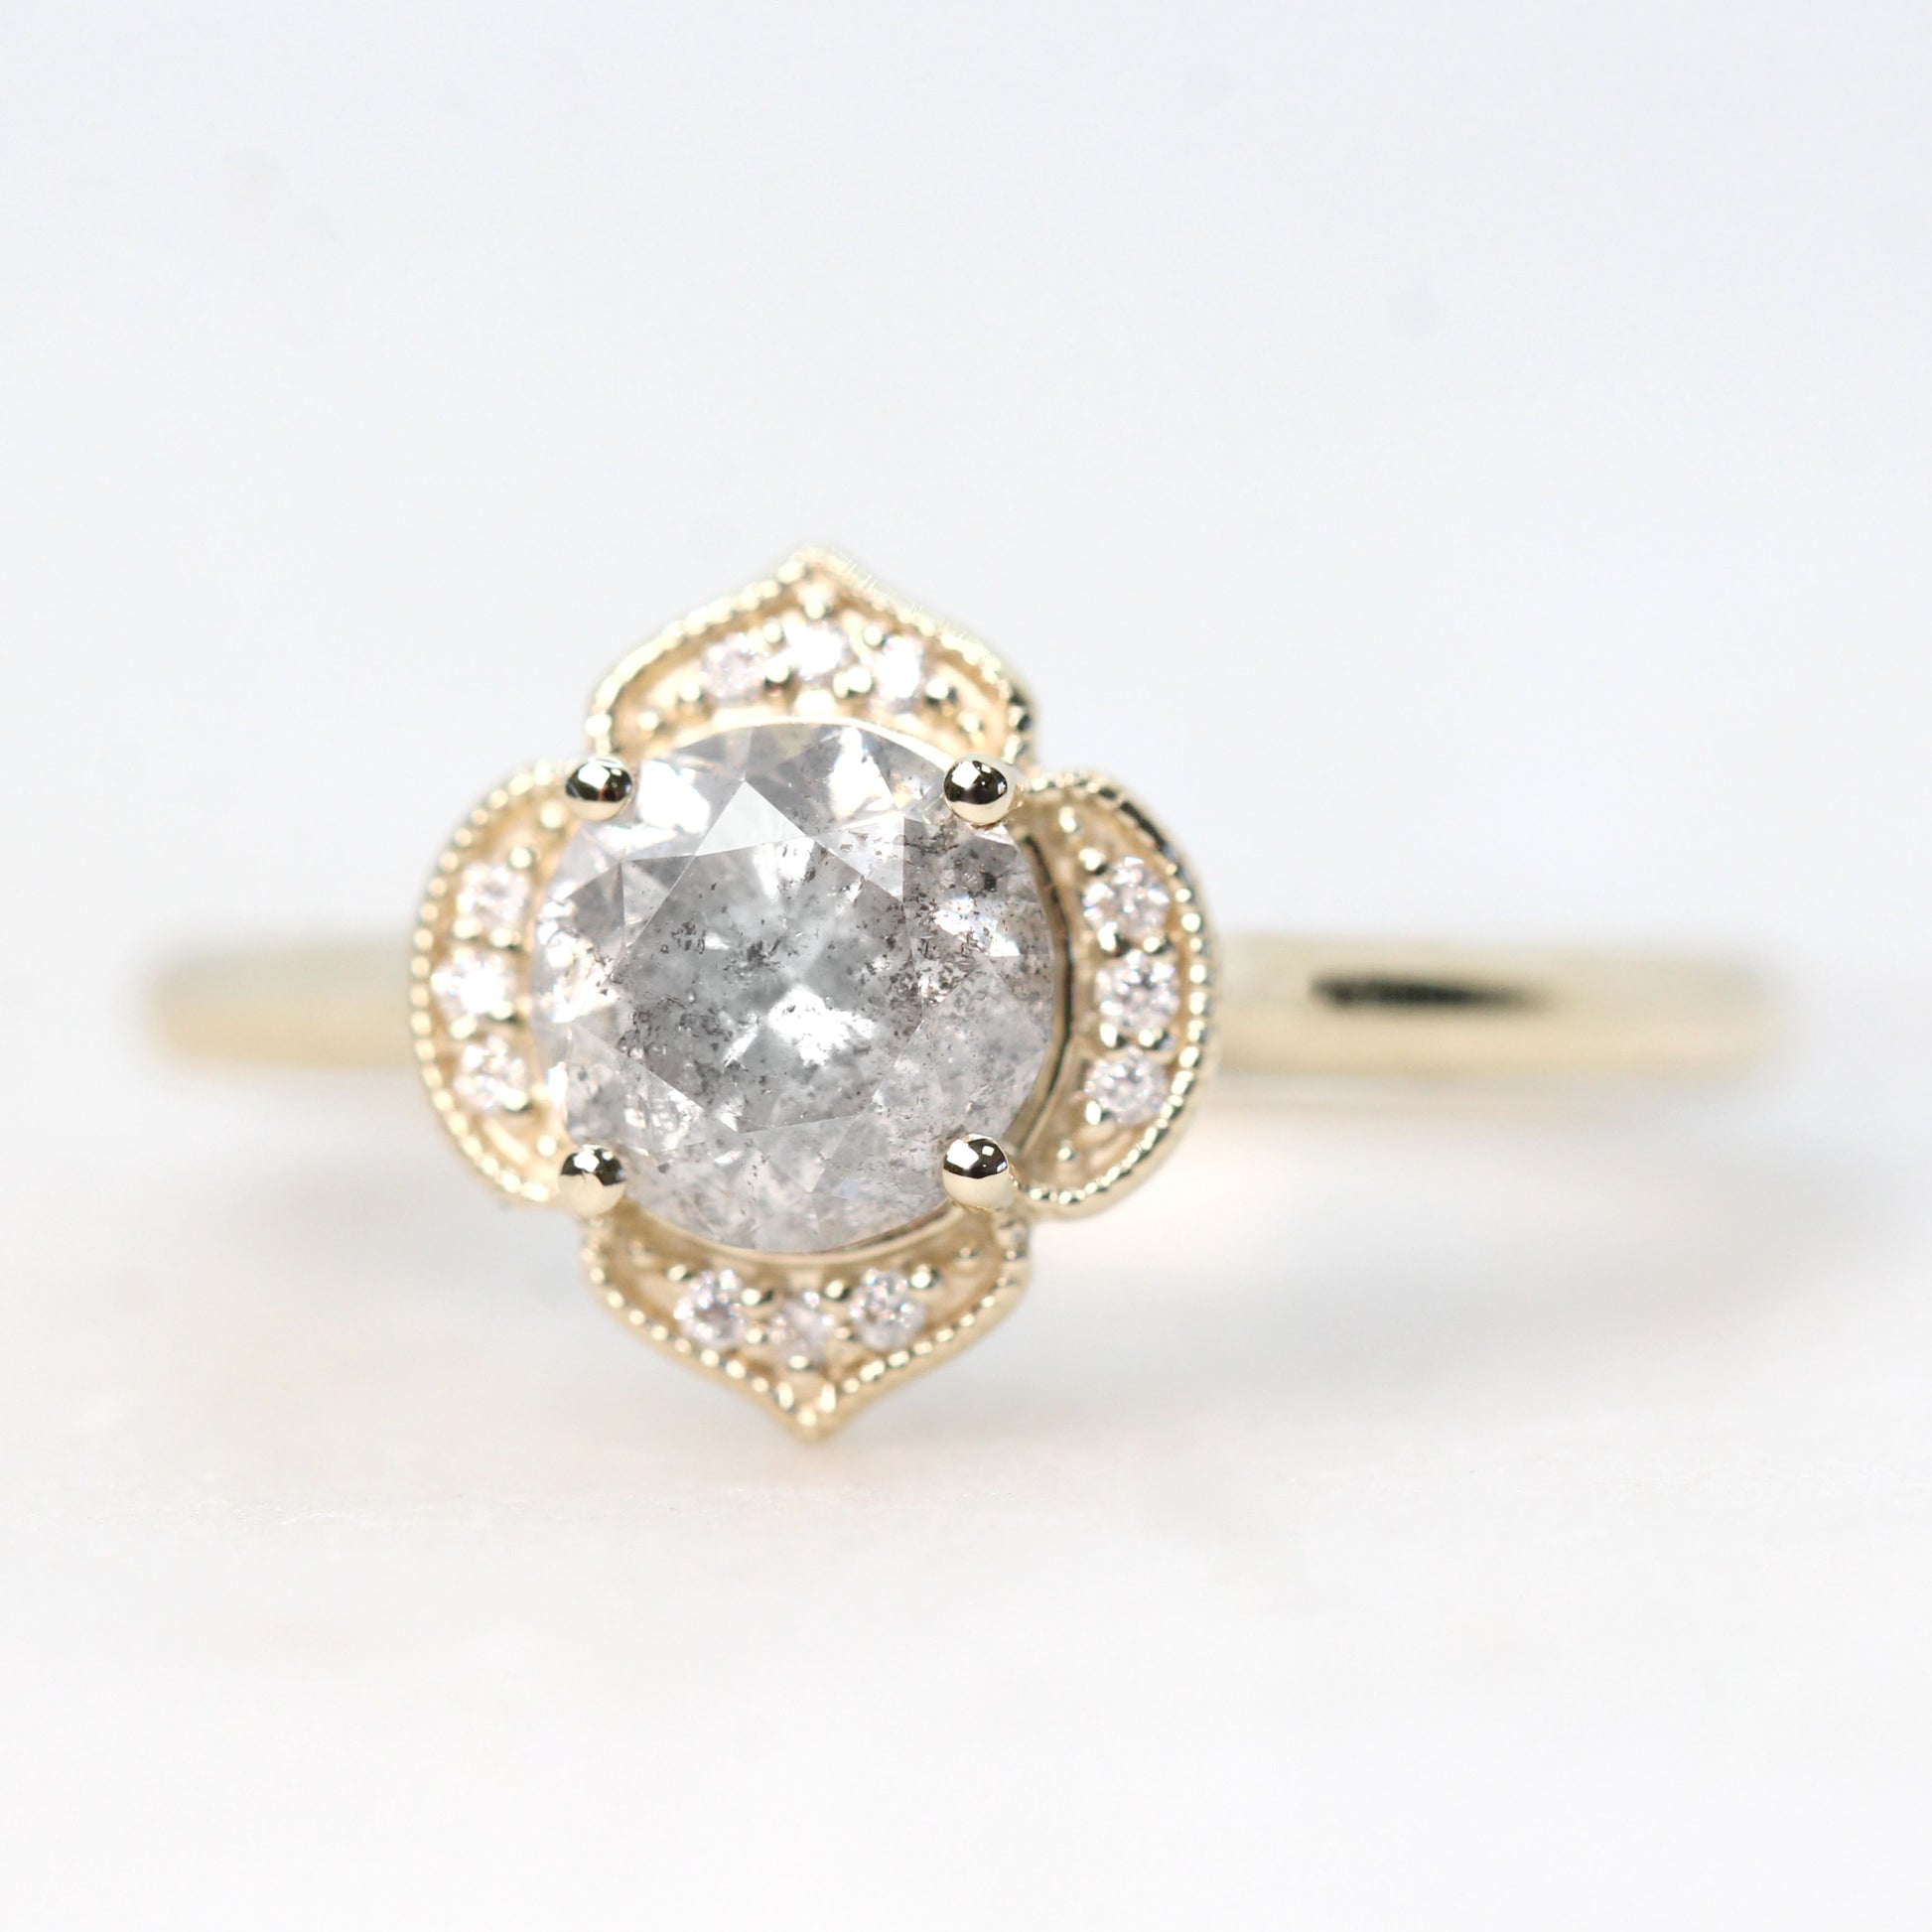 Clementine Ring with a 1.05 Carat Round Light Gray Celestial Diamond and White Accent Diamonds in 14k Yellow Gold - Ready to Size and Ship - Midwinter Co. Alternative Bridal Rings and Modern Fine Jewelry